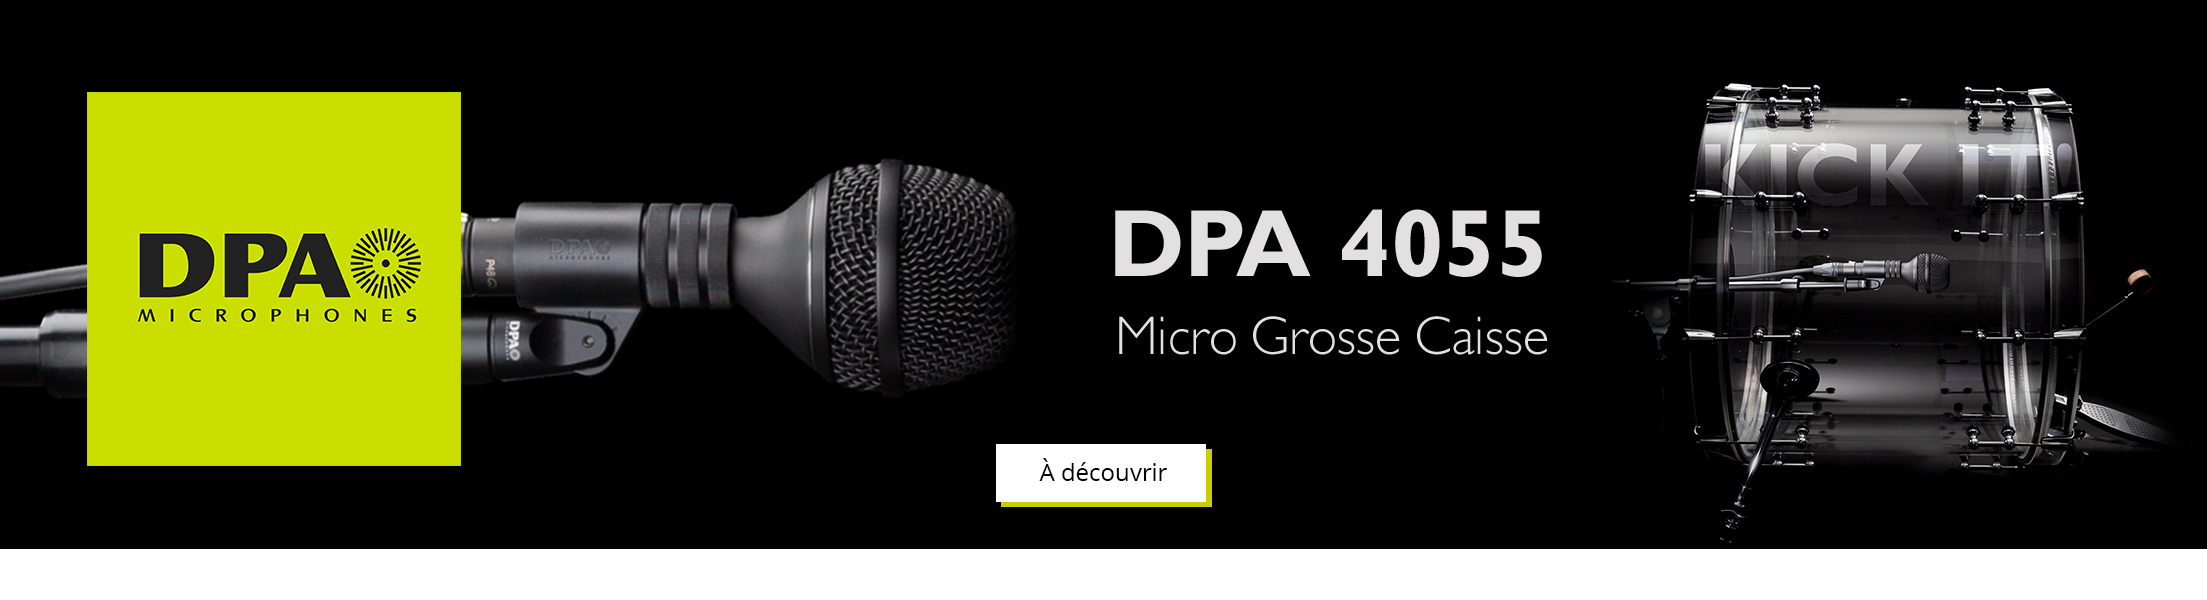 Micro grosse caisse DPA